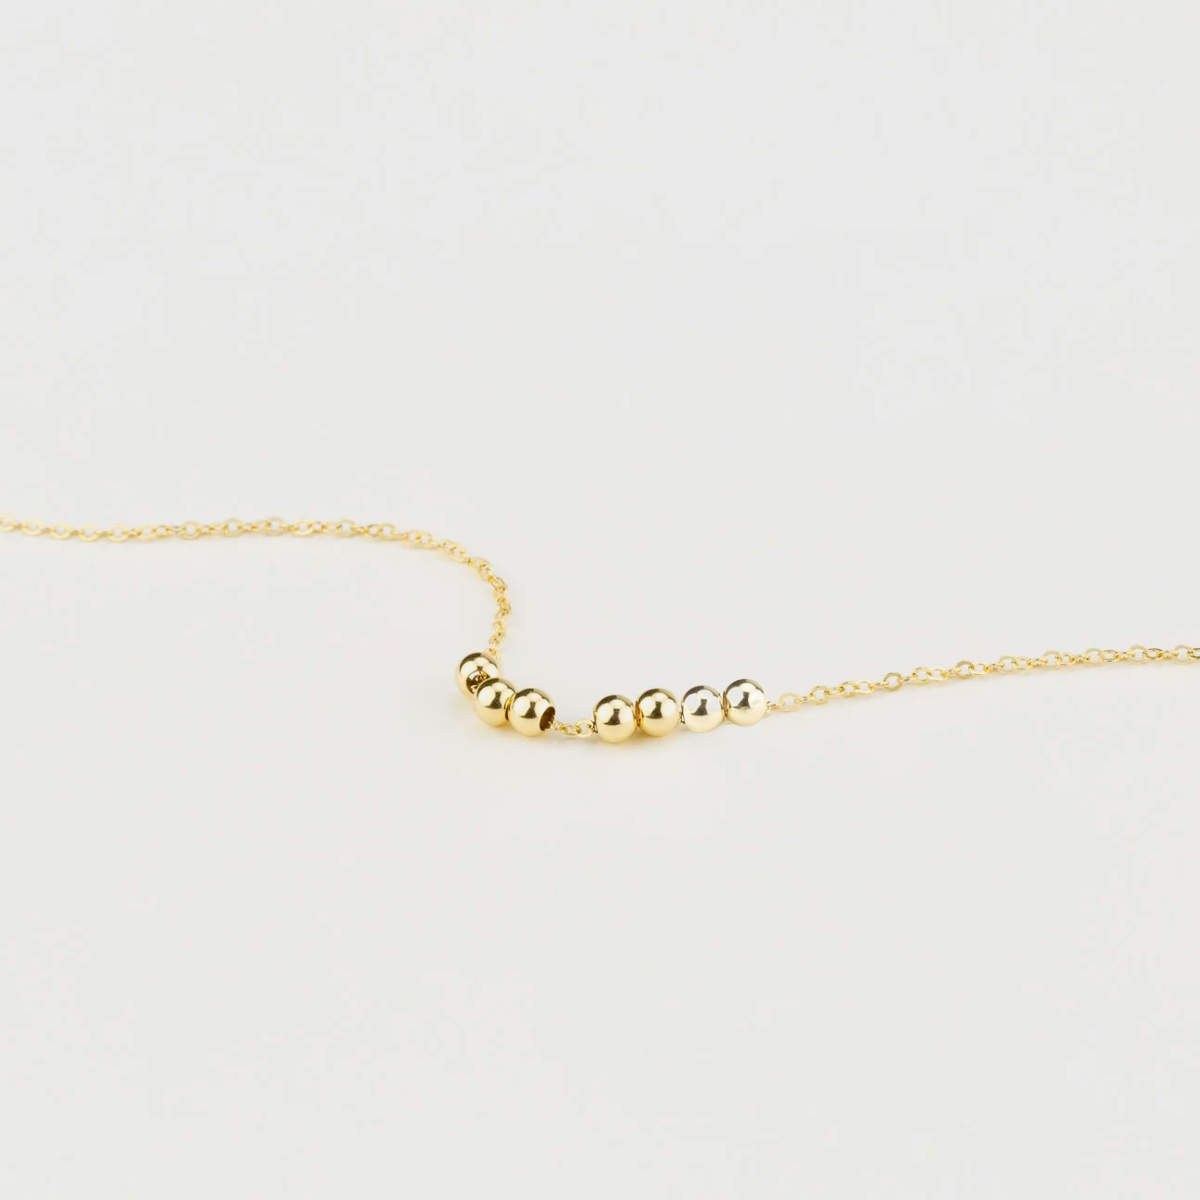 Tiny Silhouette Charm Necklace